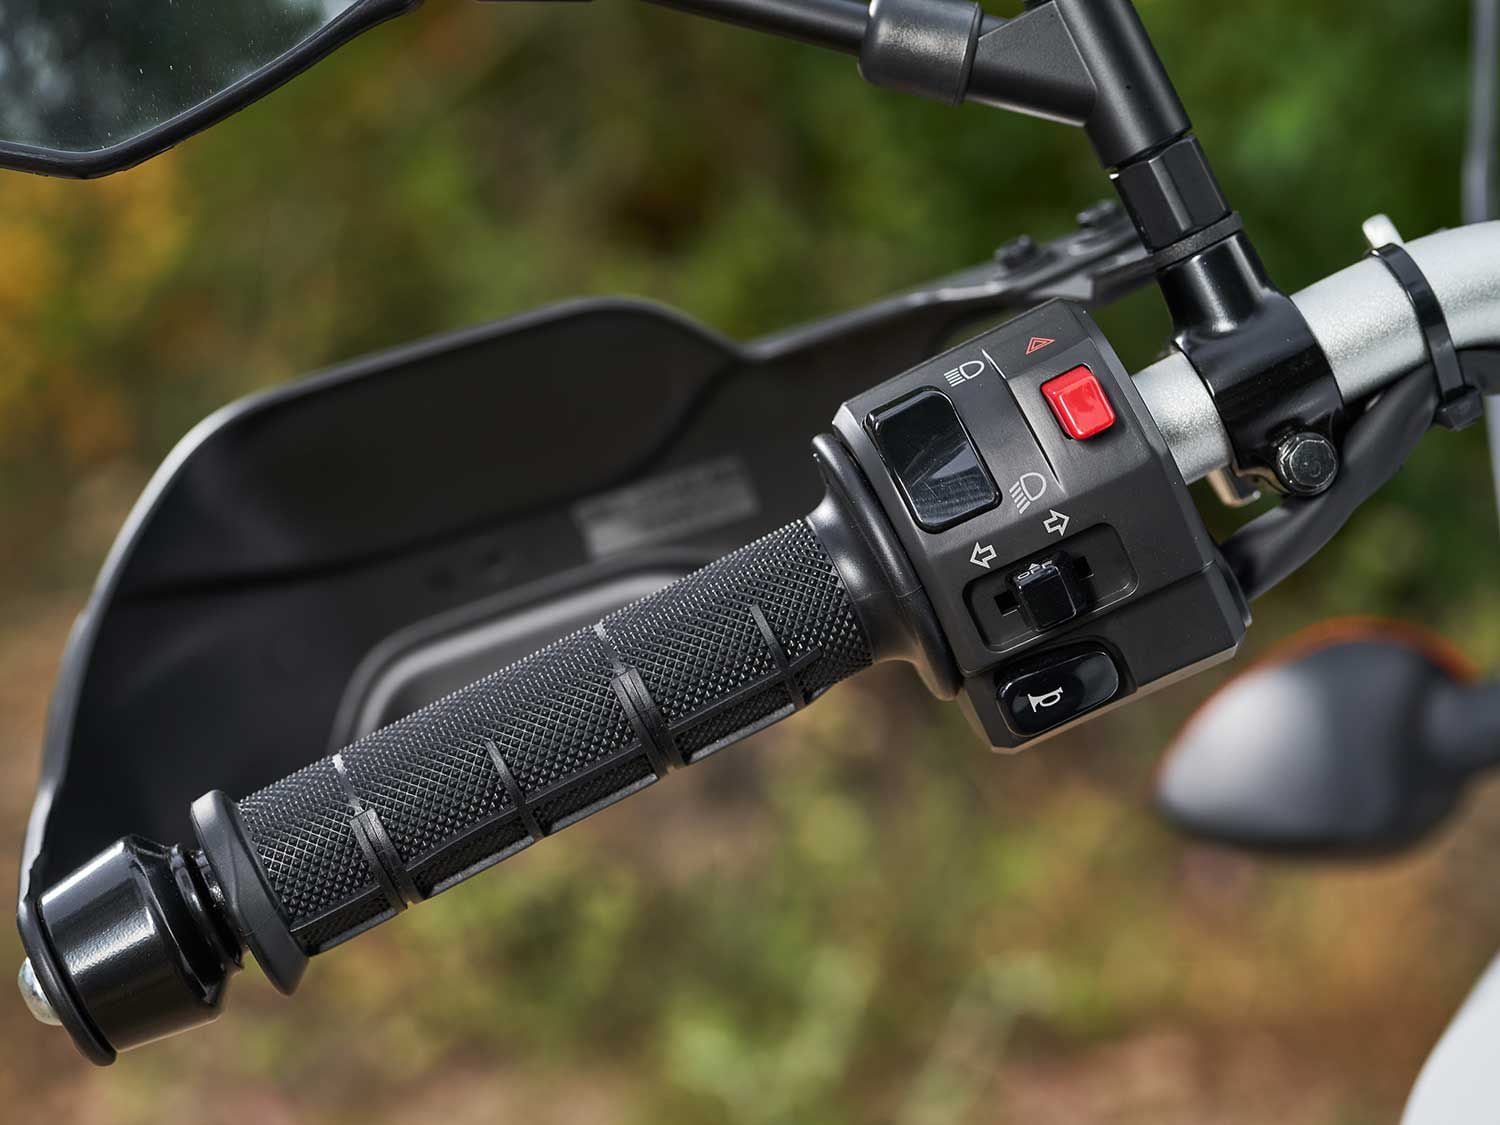 In a digital world, we appreciate the full-manual control (aside from on/off ABS) of Yamaha’s mid-sized ADV rig.